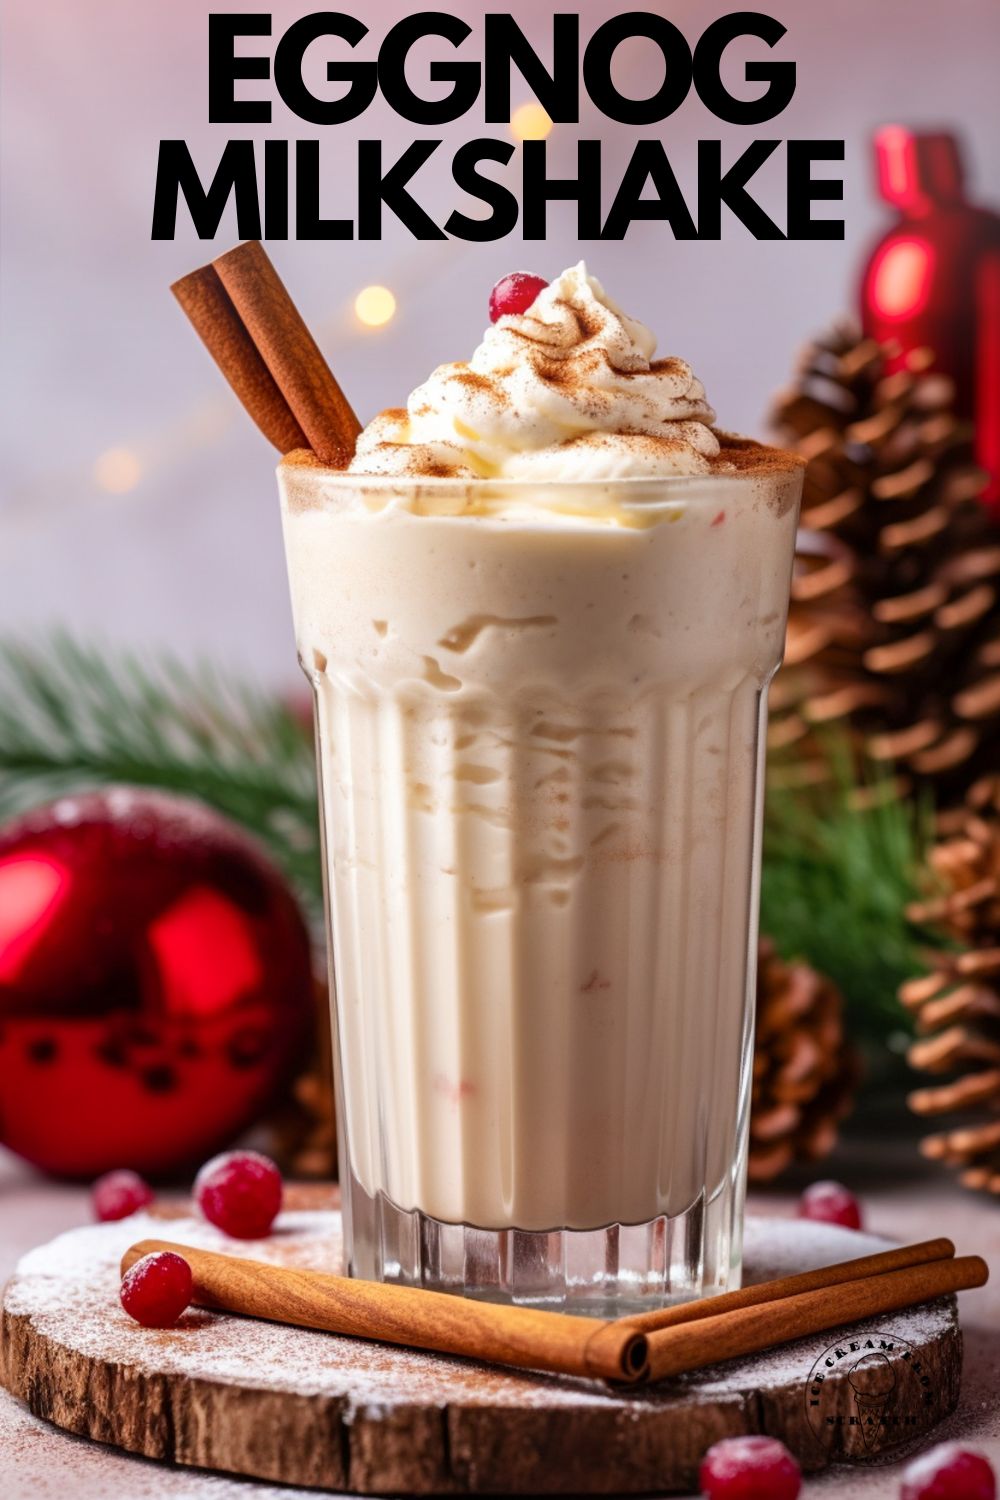 An eggnog milkshake in a tall glass, garnished with cinnamon sticks, whipped cream, and a cranberry. In the background are red ornaments, greenery, and pinecones. Text overlay says "eggnog milkshake" in capital letters"